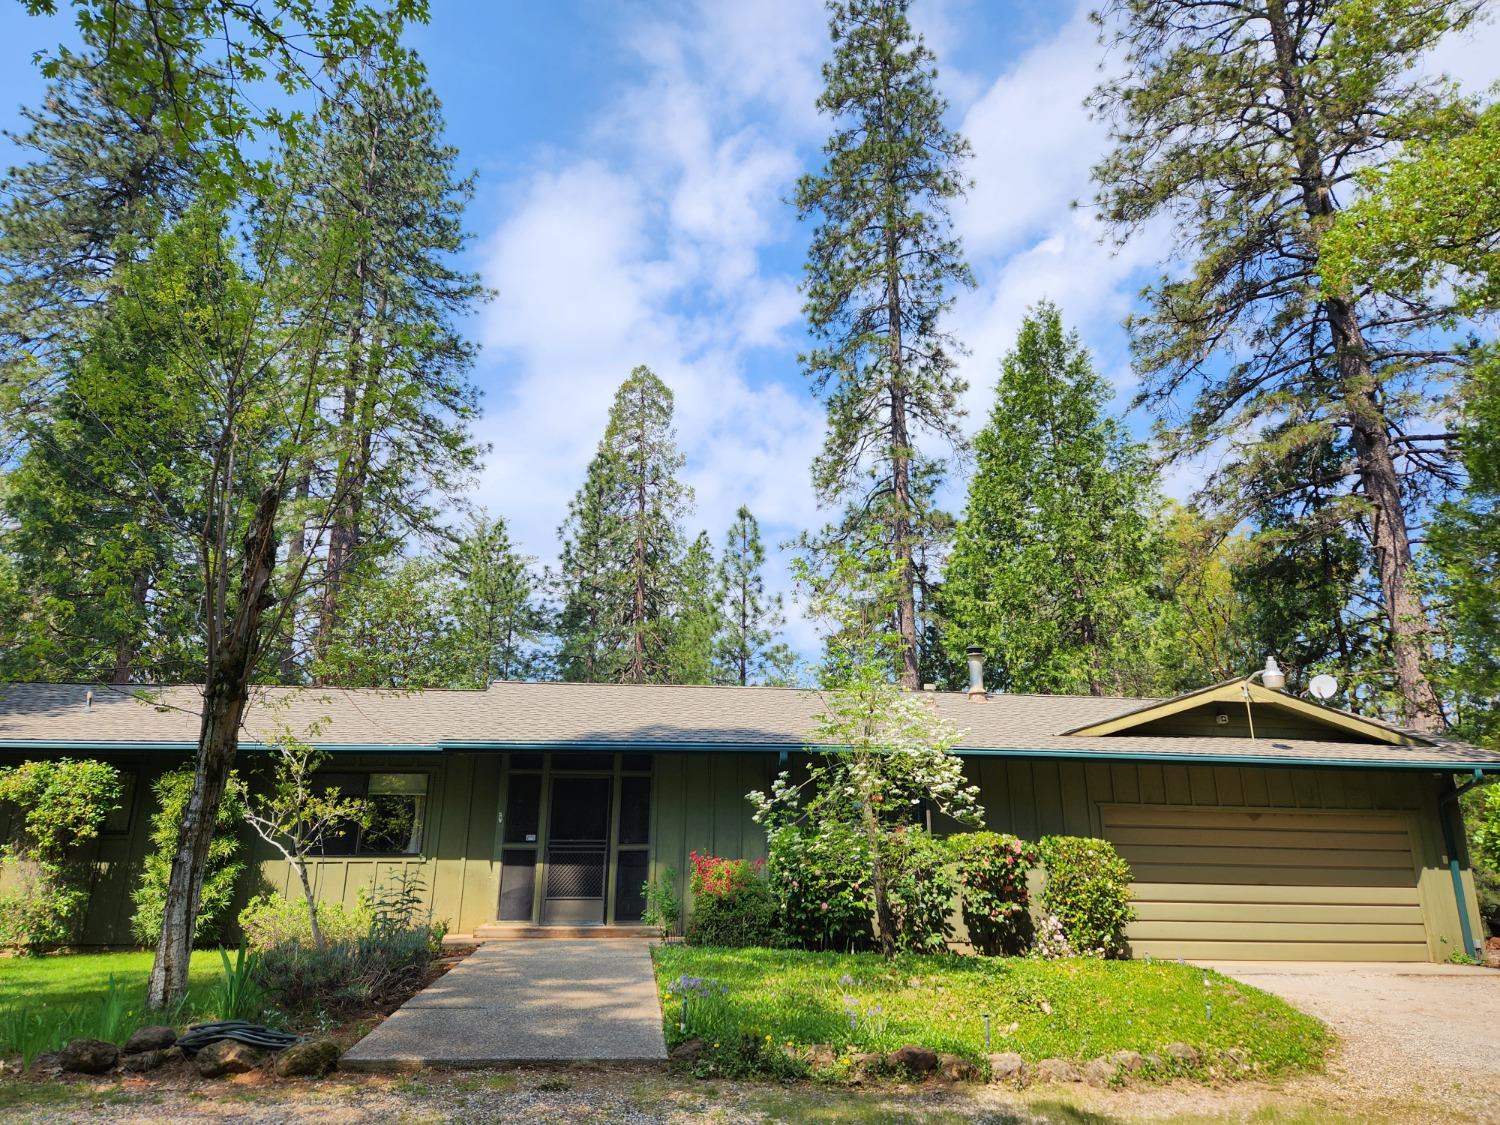 Photo of 13943 Greenhorn Rd in Grass Valley, CA